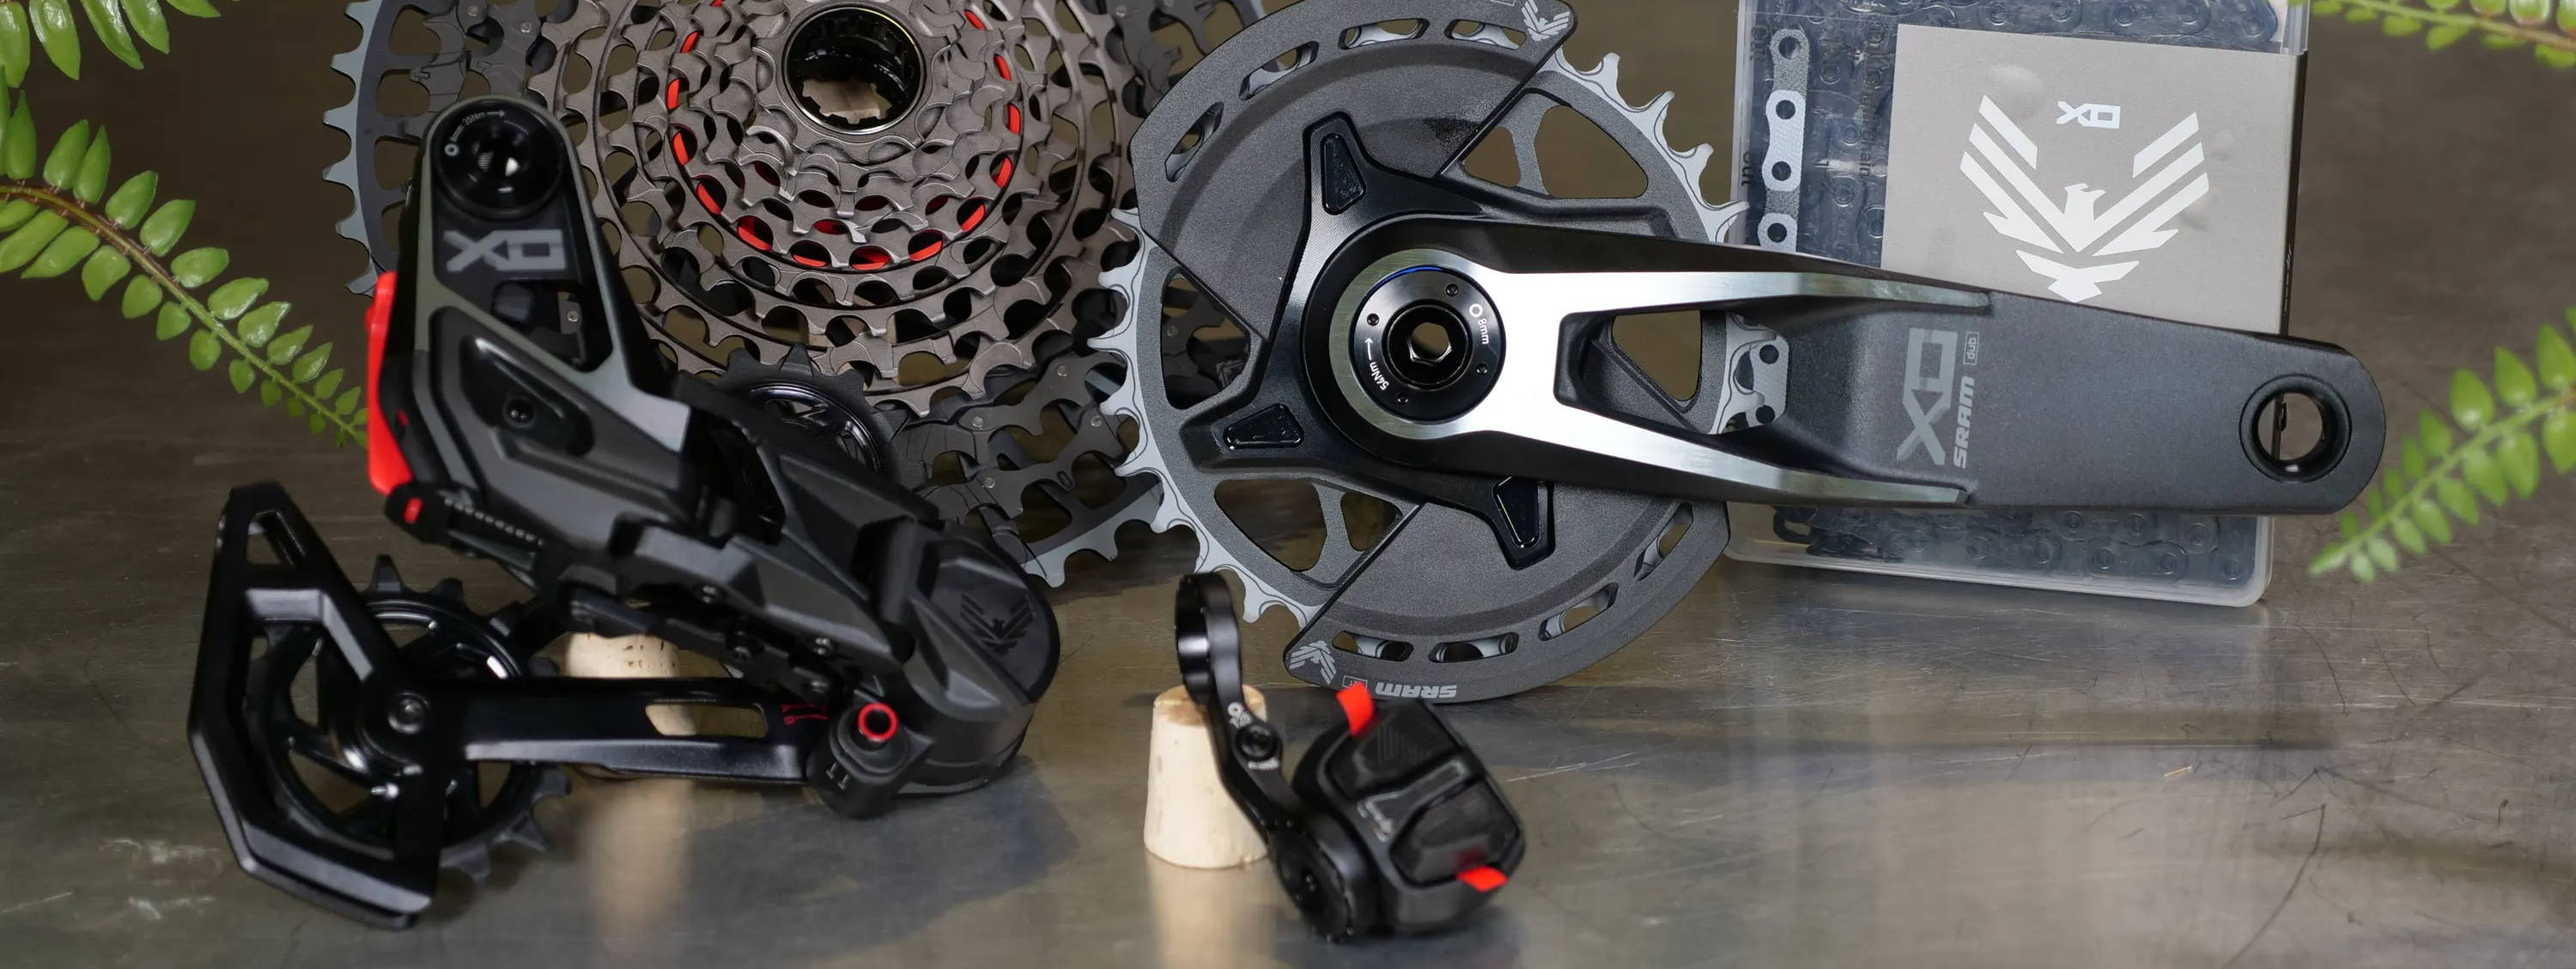 sram x0 eagle axs transmission groupset on a table